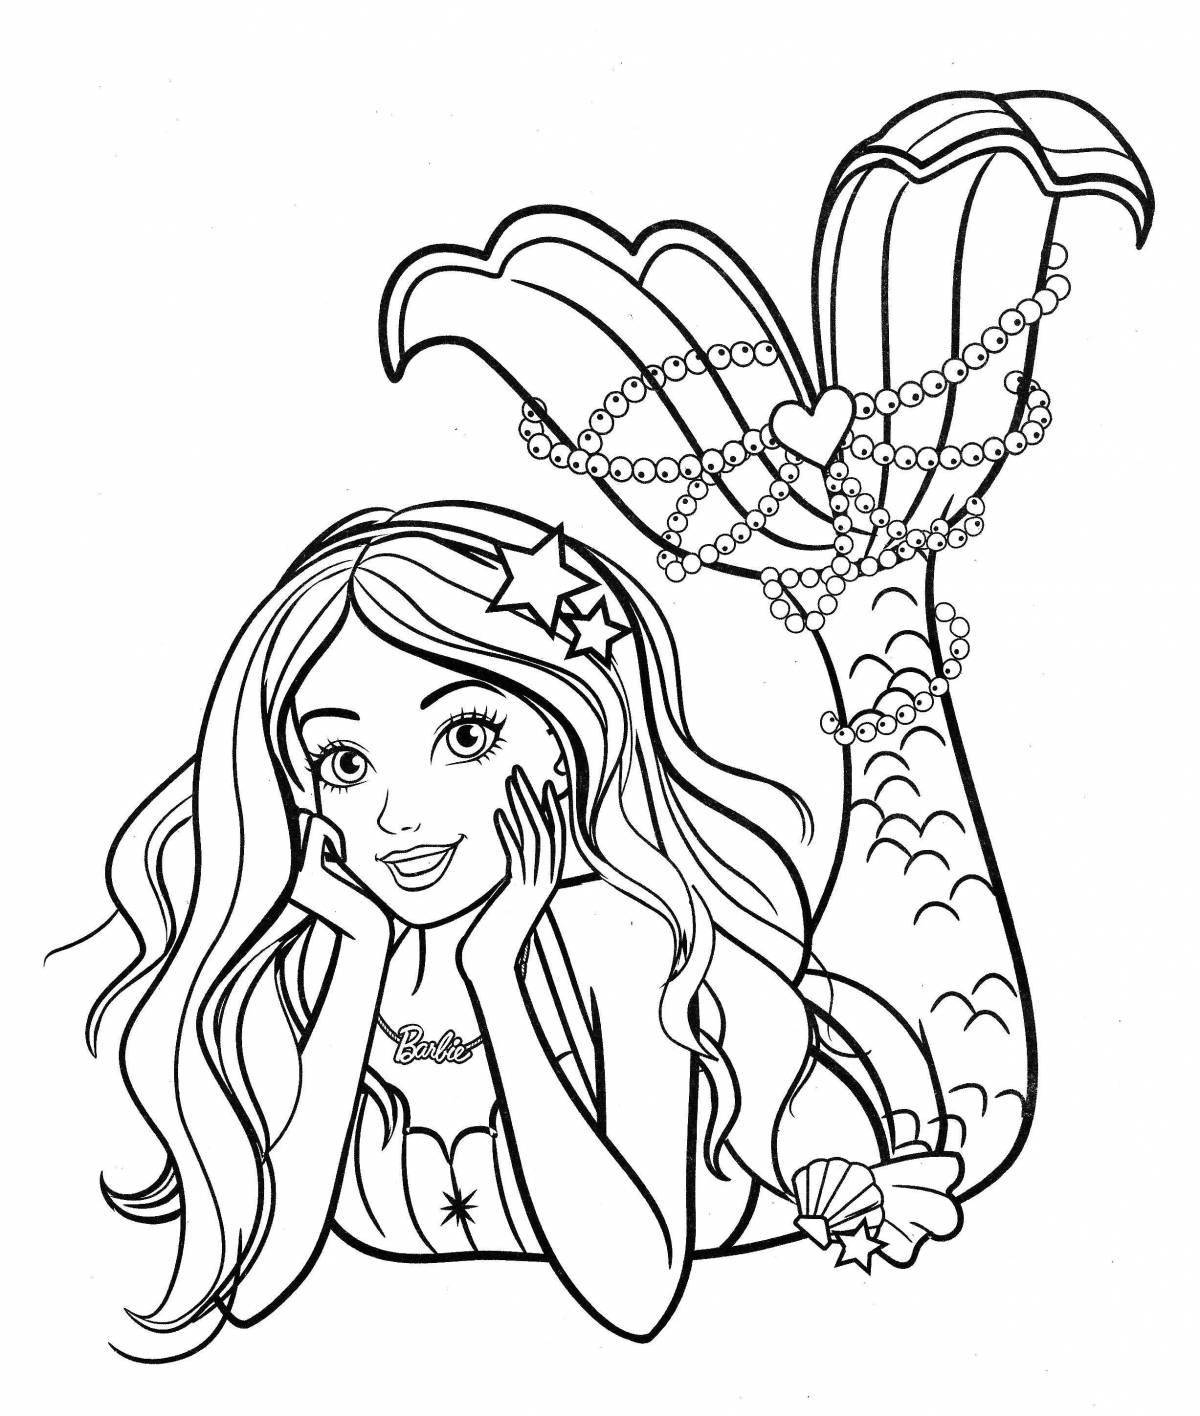 Exquisite barbie mermaid coloring book for girls